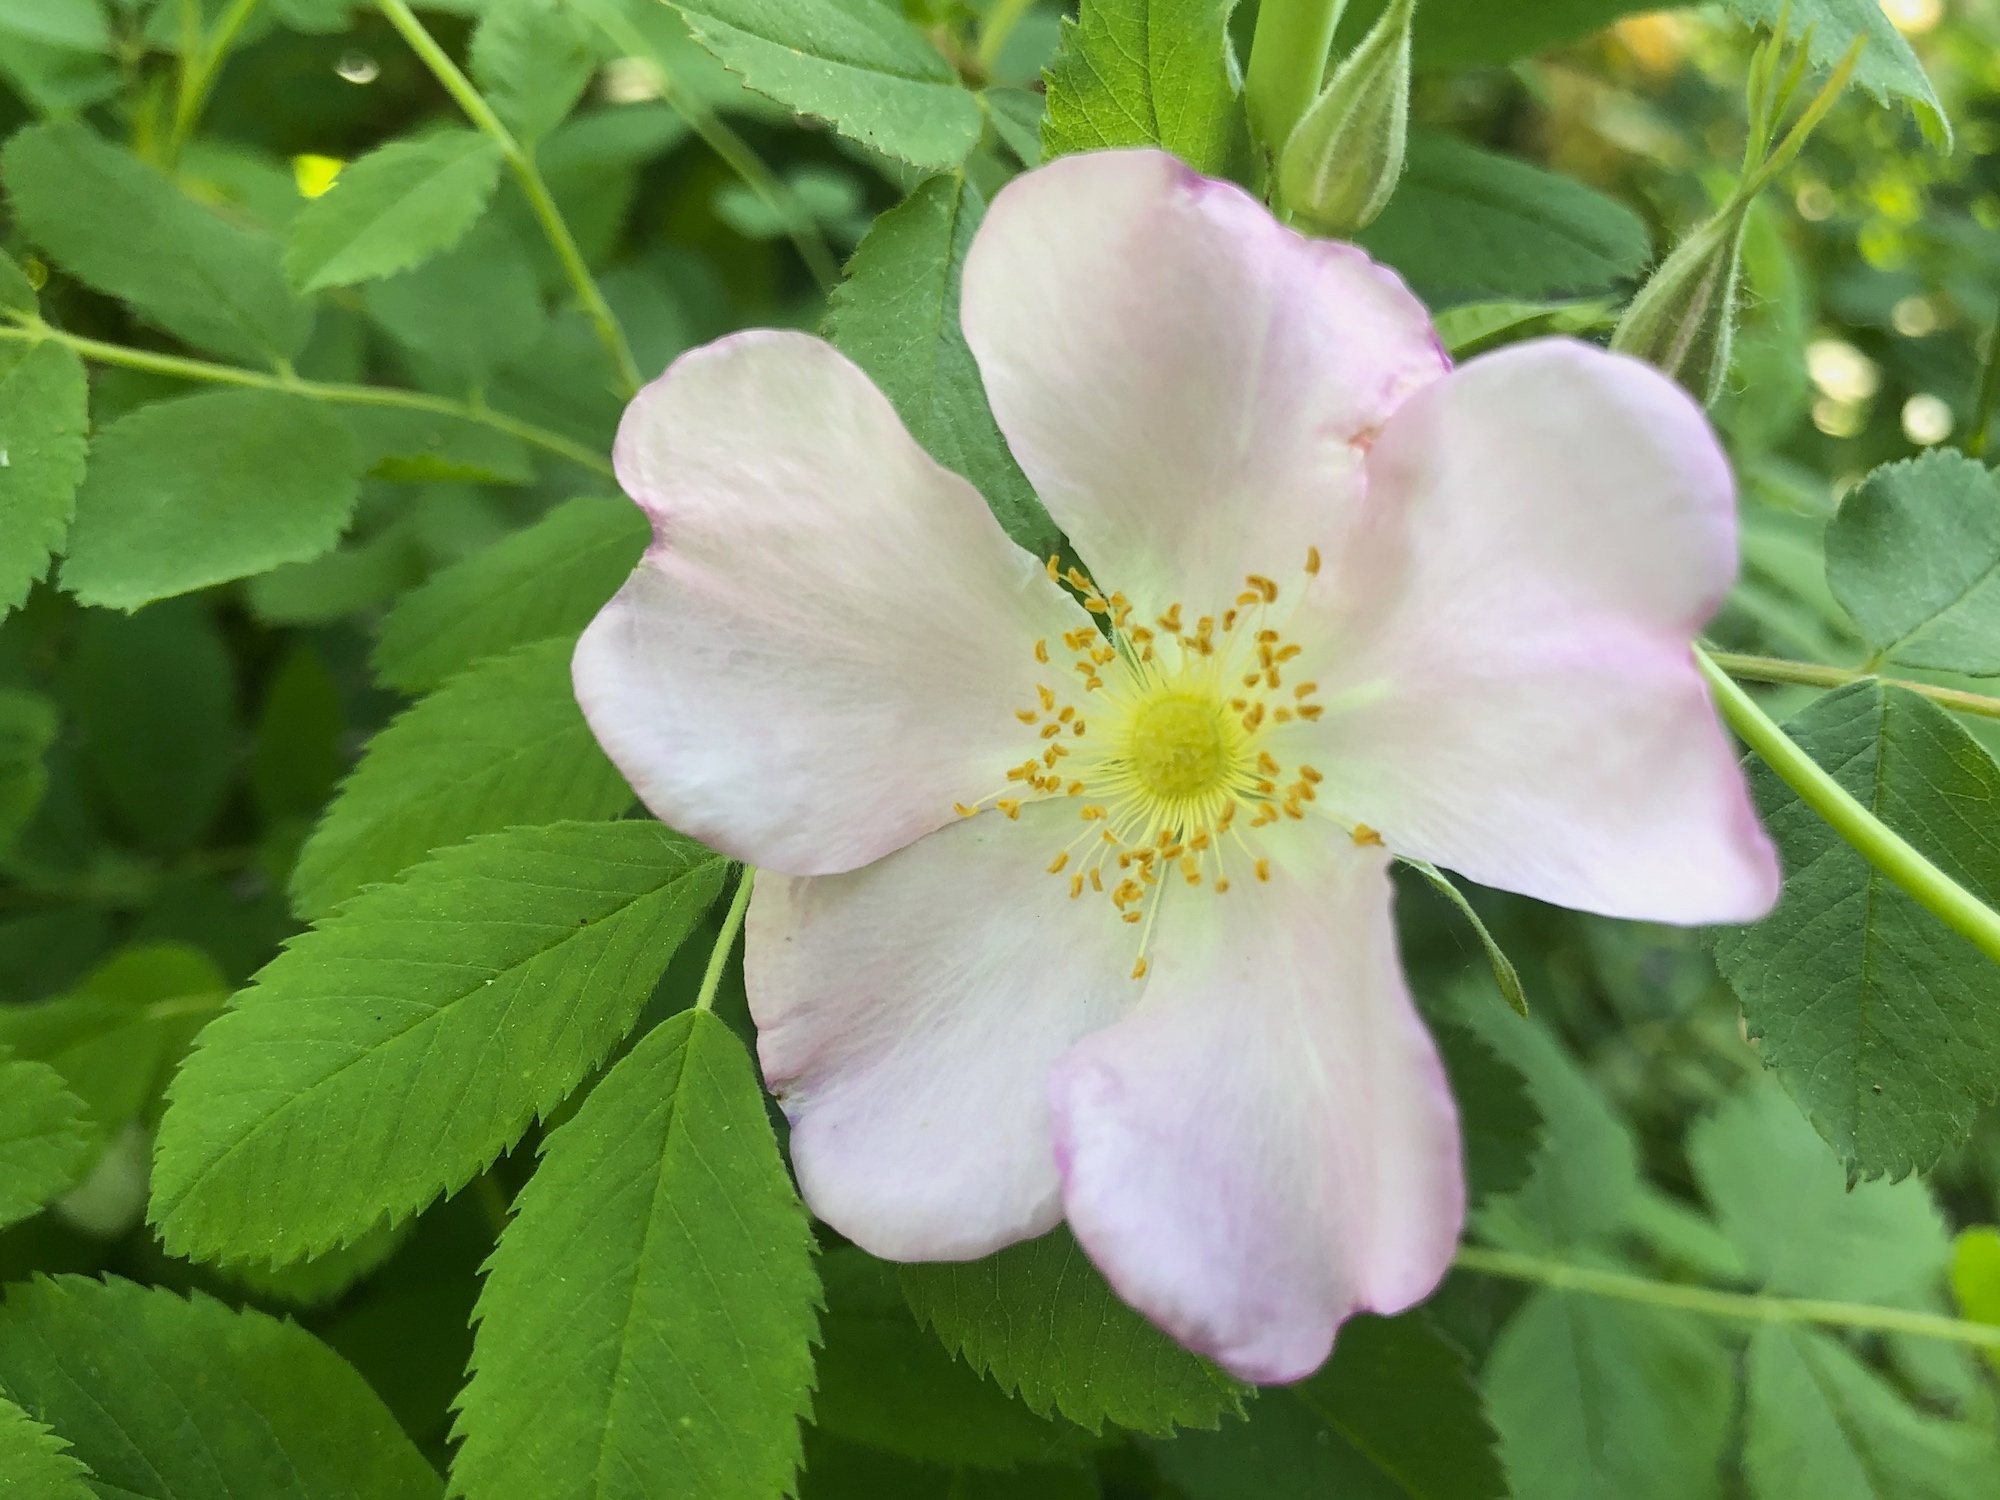 Prairie Rose near Council Ring in the Oak Savanna in Madison, Wisconsin on June 4, 2020.